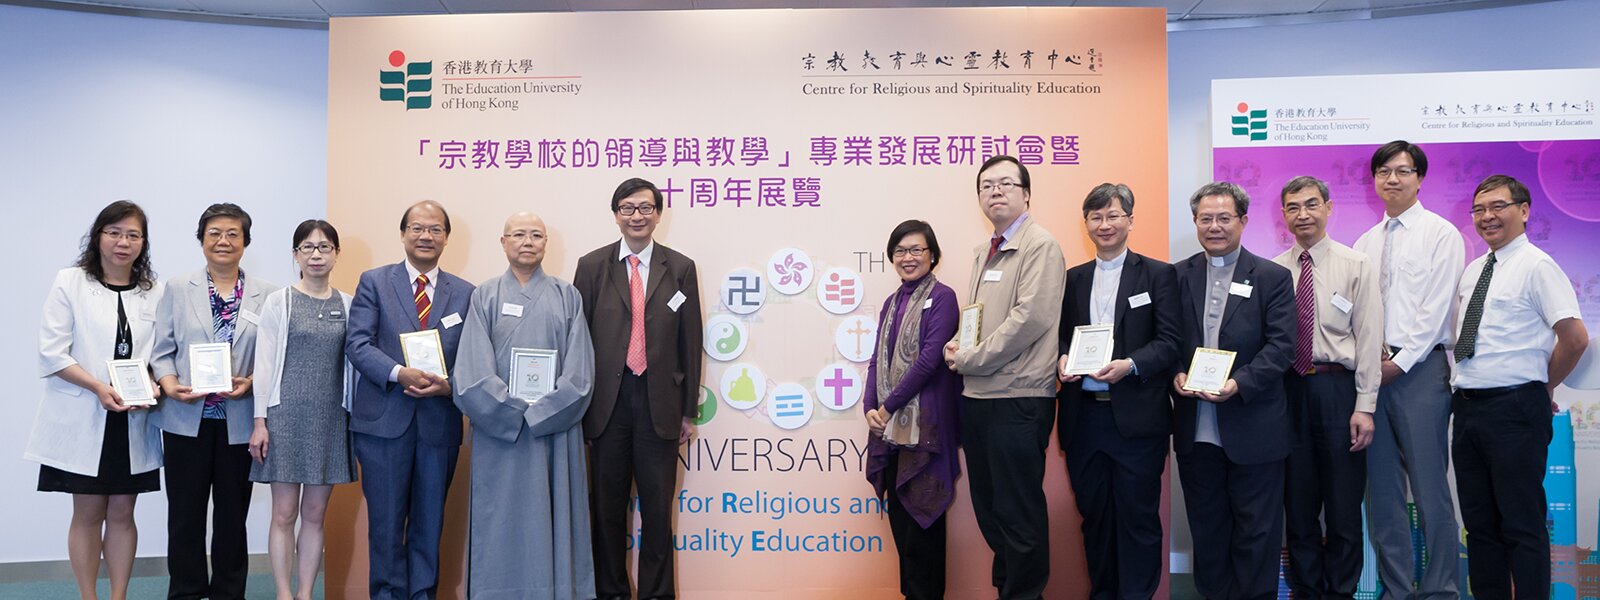 EdUHK Celebrates a Decade of Promoting Religious Education with Seminar on Leadership and Teaching in Religious Schools